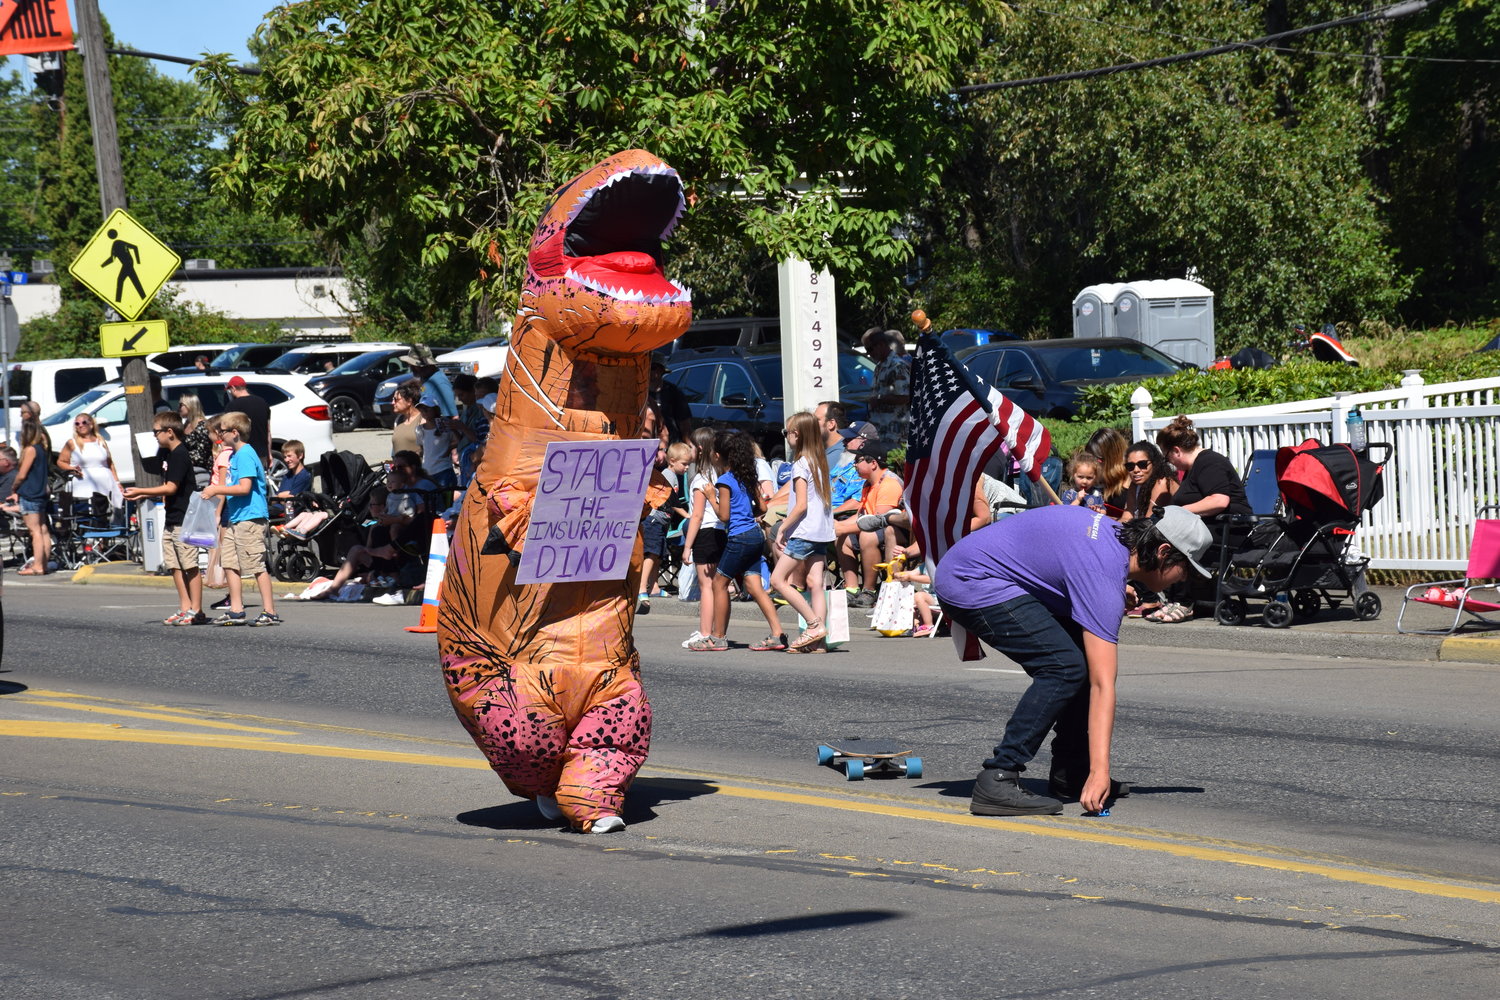 “Stacey the insurance dino” marches down Main Street during Battle Ground’s Harvest Days parade on July 17, 2021.